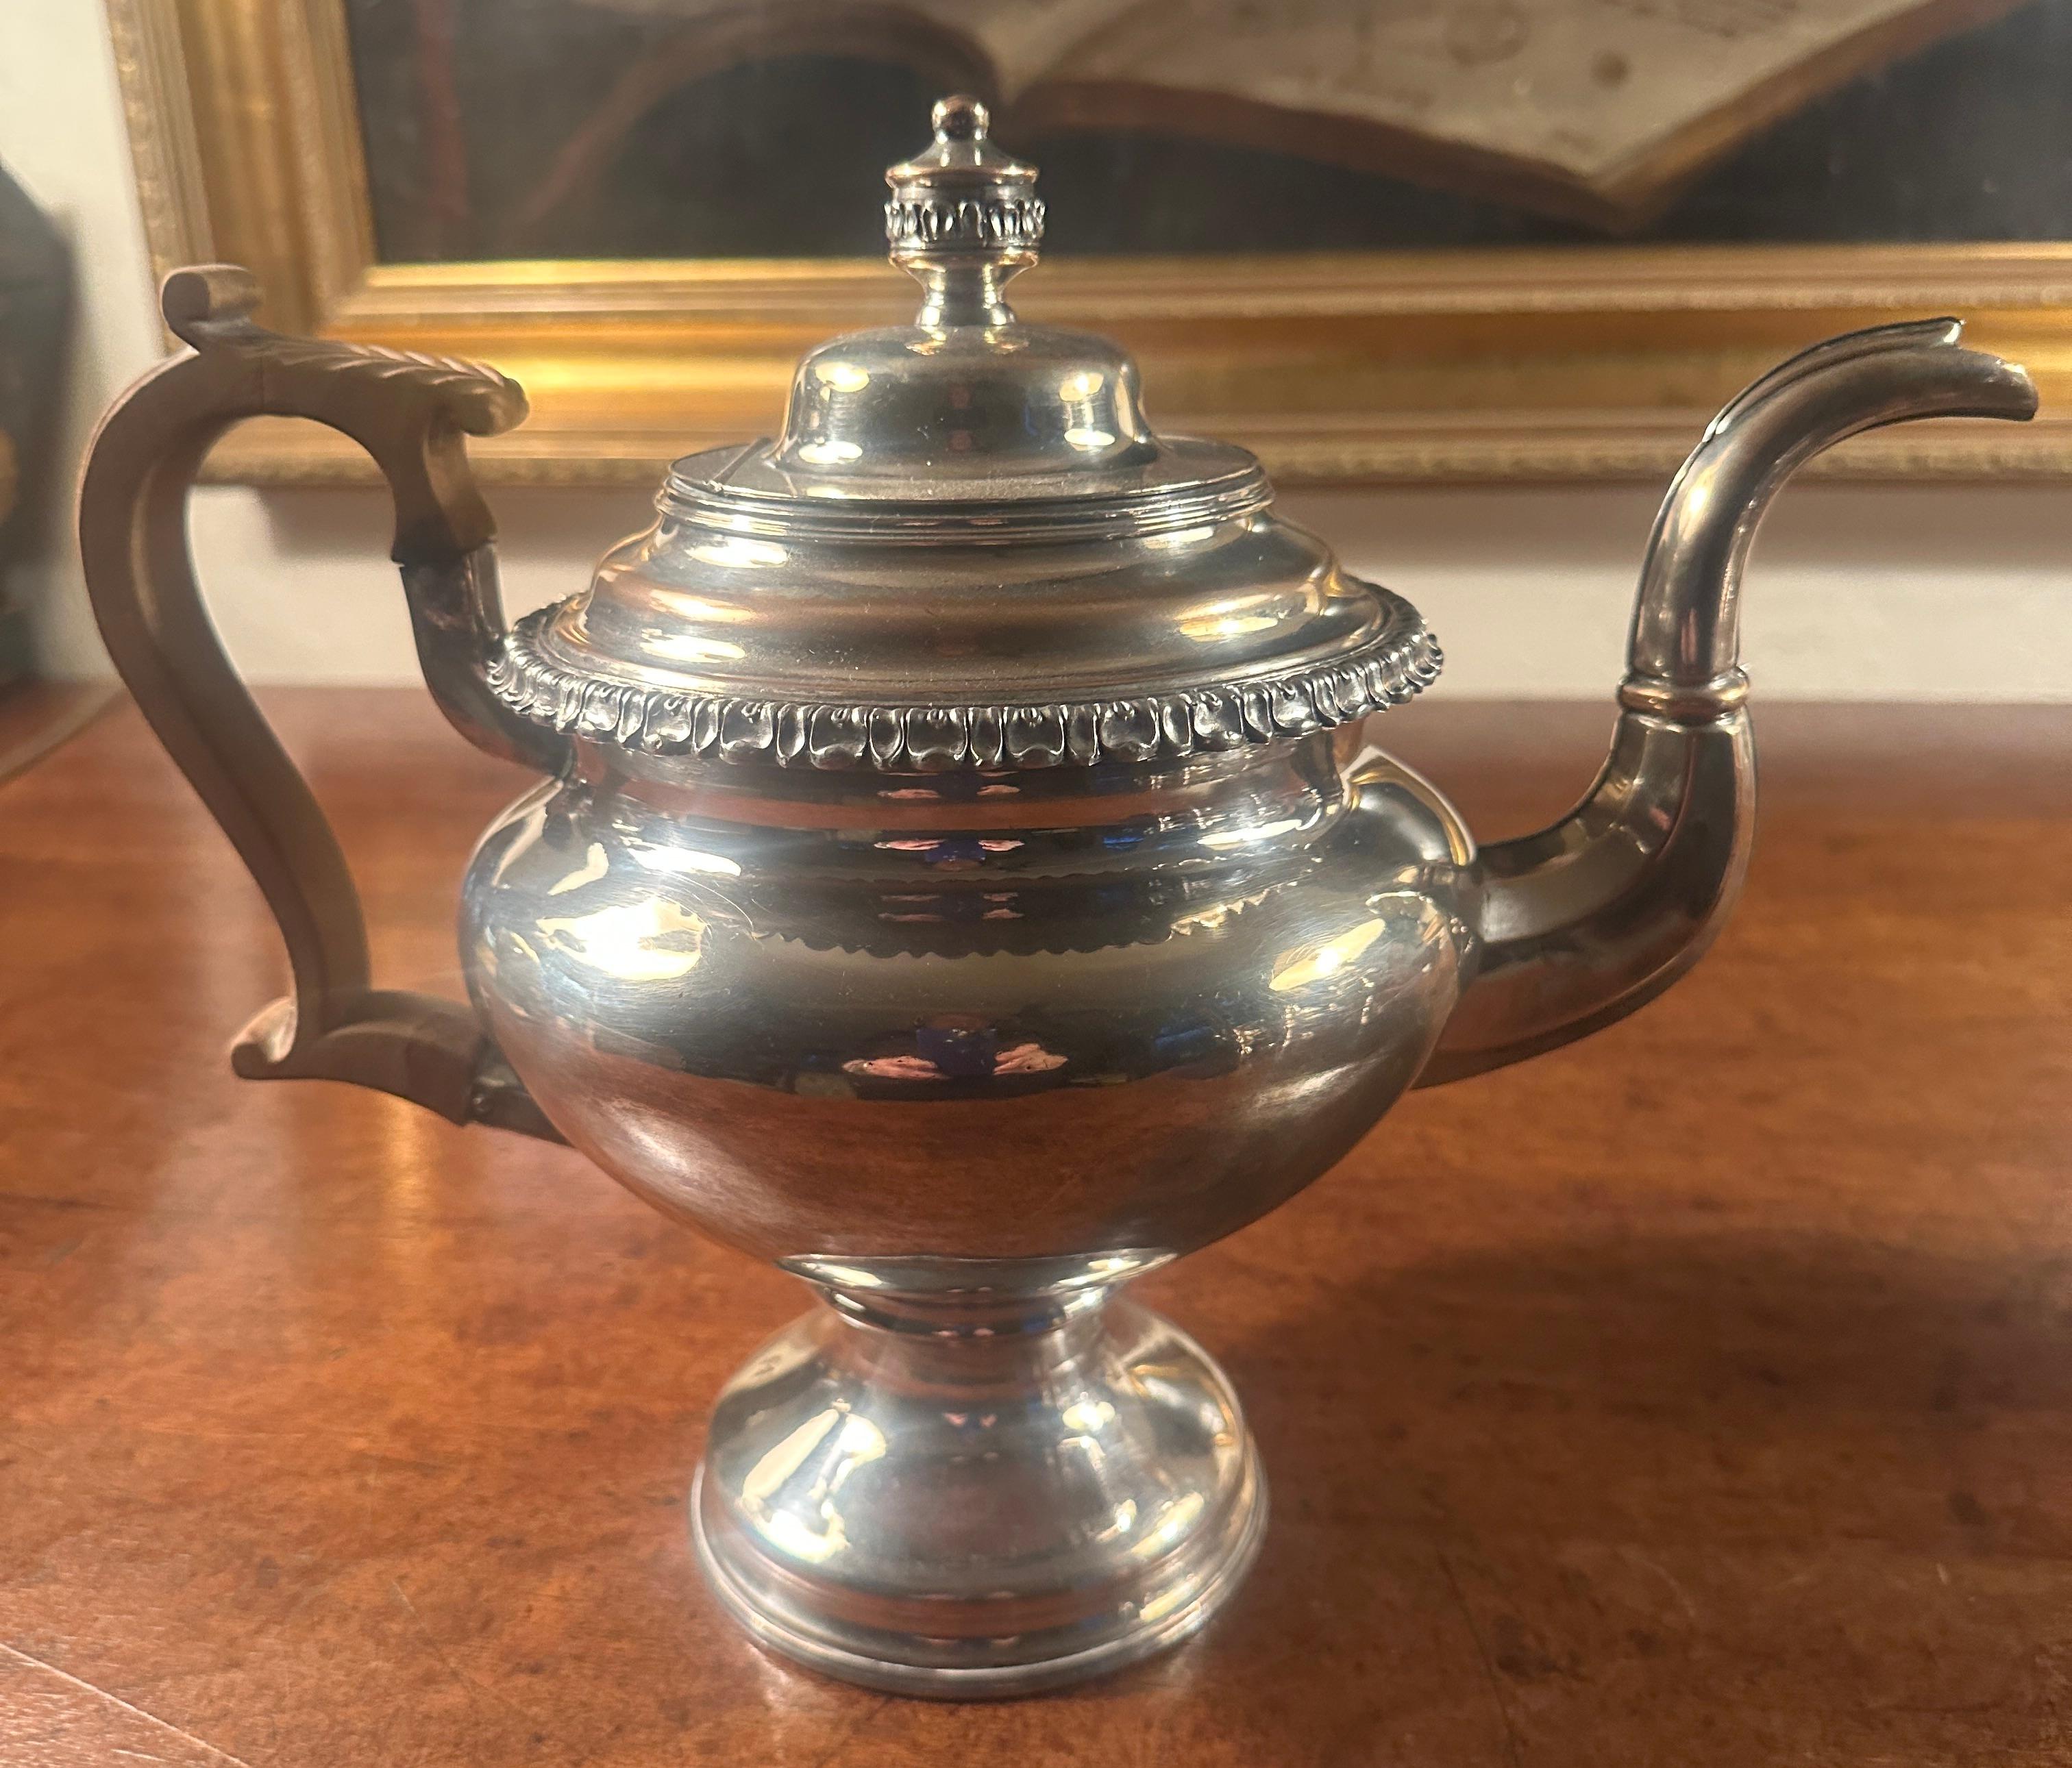 Coffee and Chocolate were both introcuced into England
in the Mid-17th Century, and were to become
an important part of social life, with more than four hundred
coffee houses in London alone. The earliest known silver coffee
pot is hallmarked